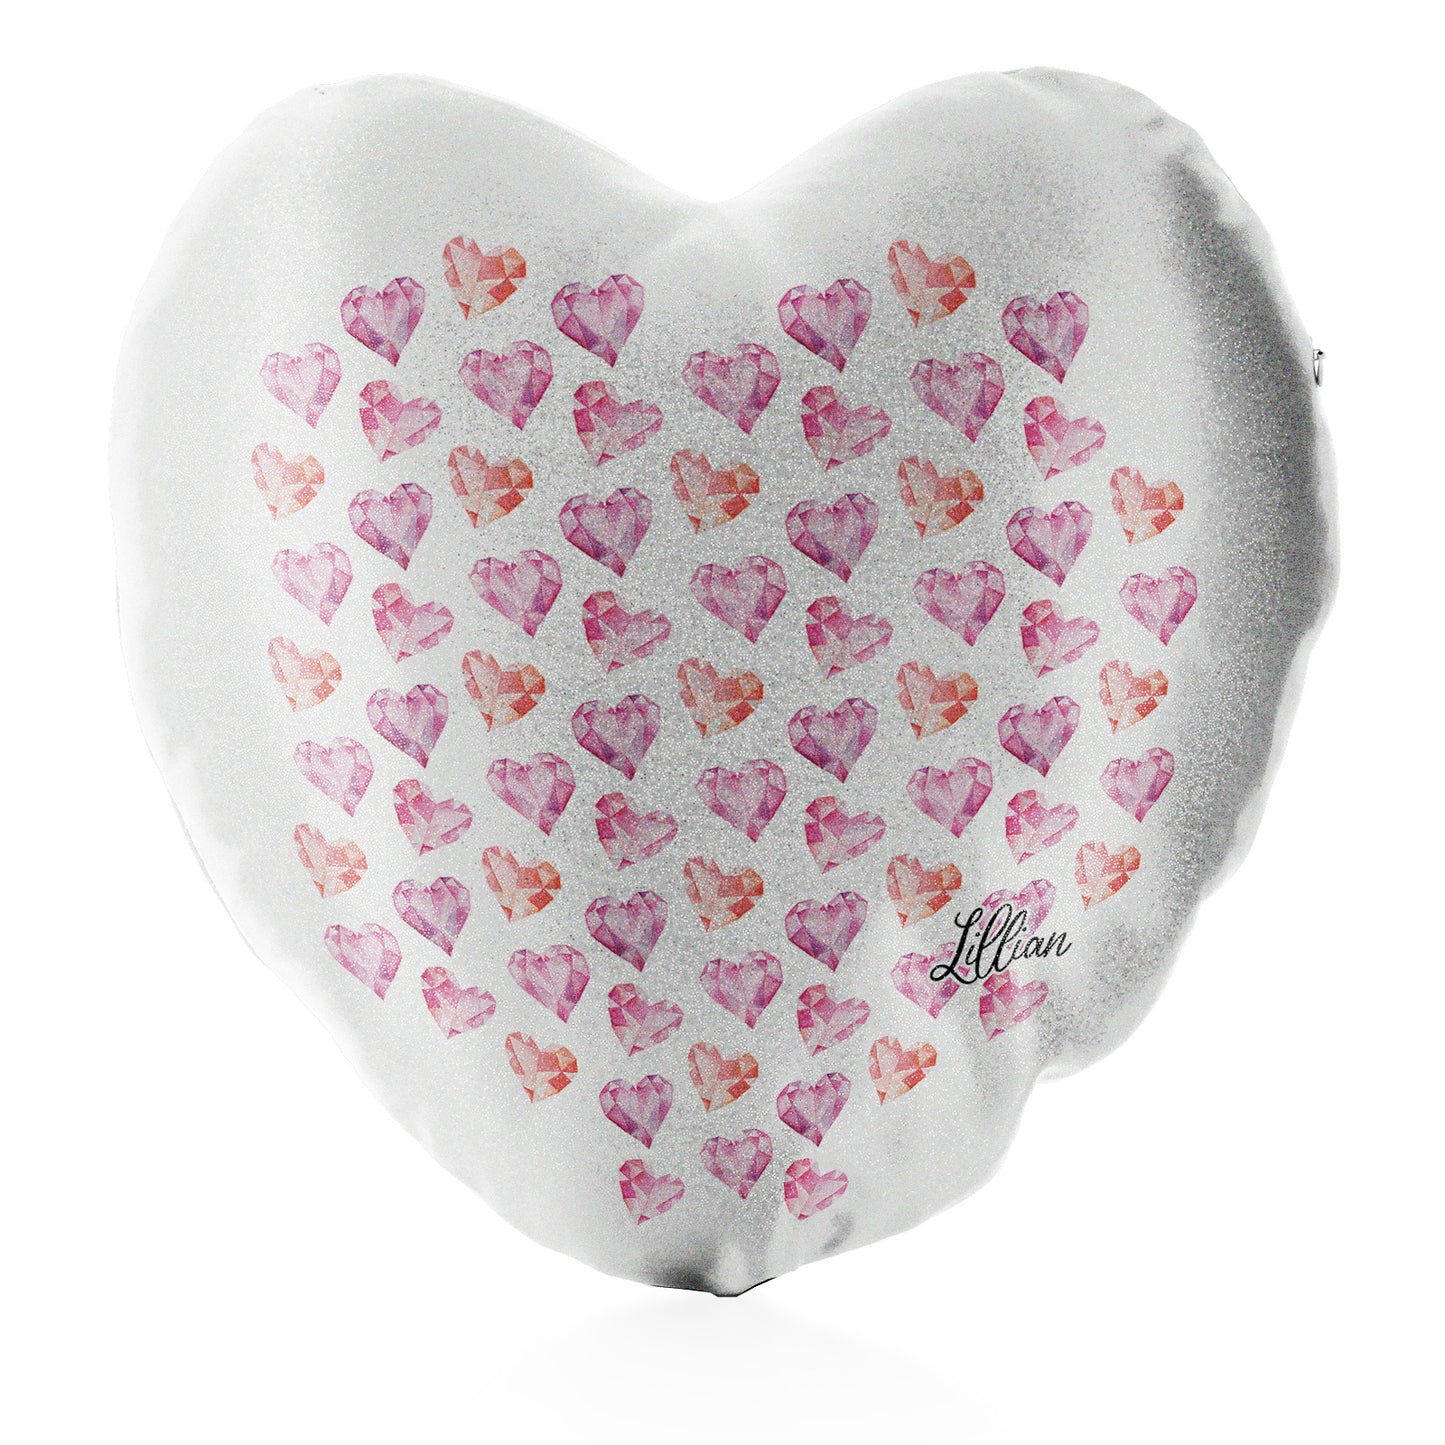 Personalised Glitter Heart Cushion with Stylish Text and Crystal Hearts Print